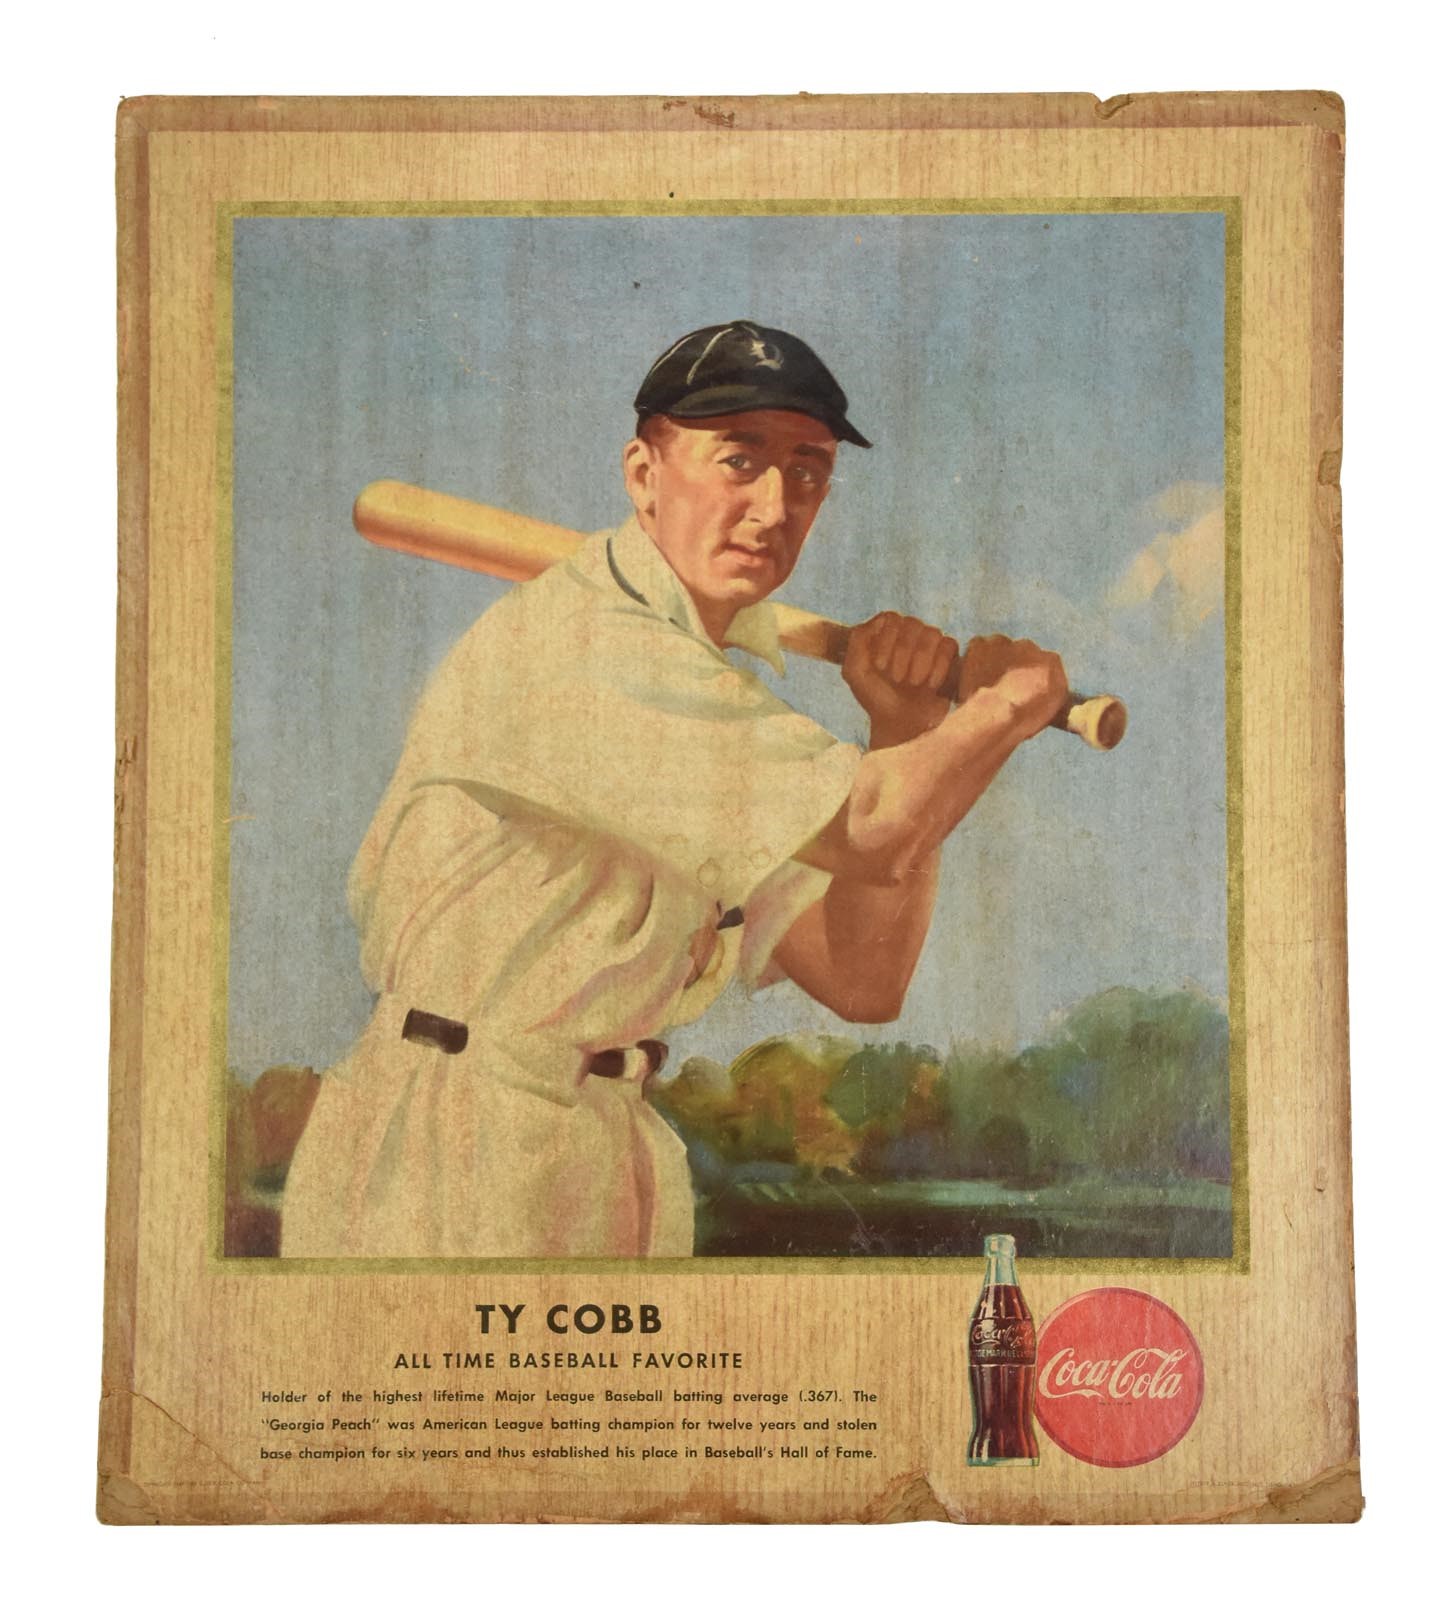 Ty Cobb and Detroit Tigers - Ty Cobb Coca Cola Cardboard Advertising Display